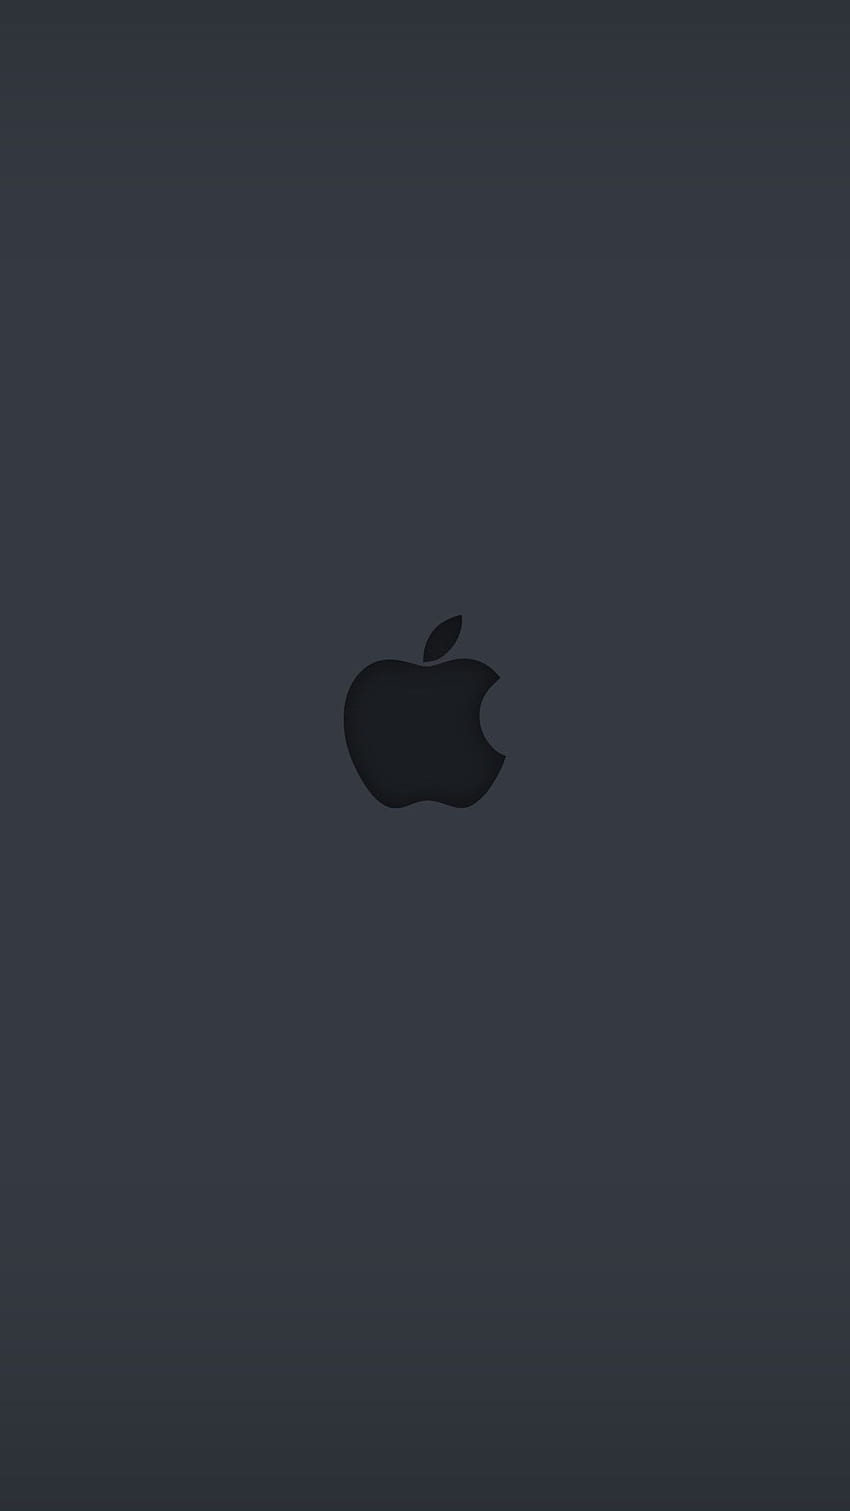 Apple Mac Pro, Apple logo, Computers, macos, dark, black, animal themes • For You For & Mobile HD phone wallpaper